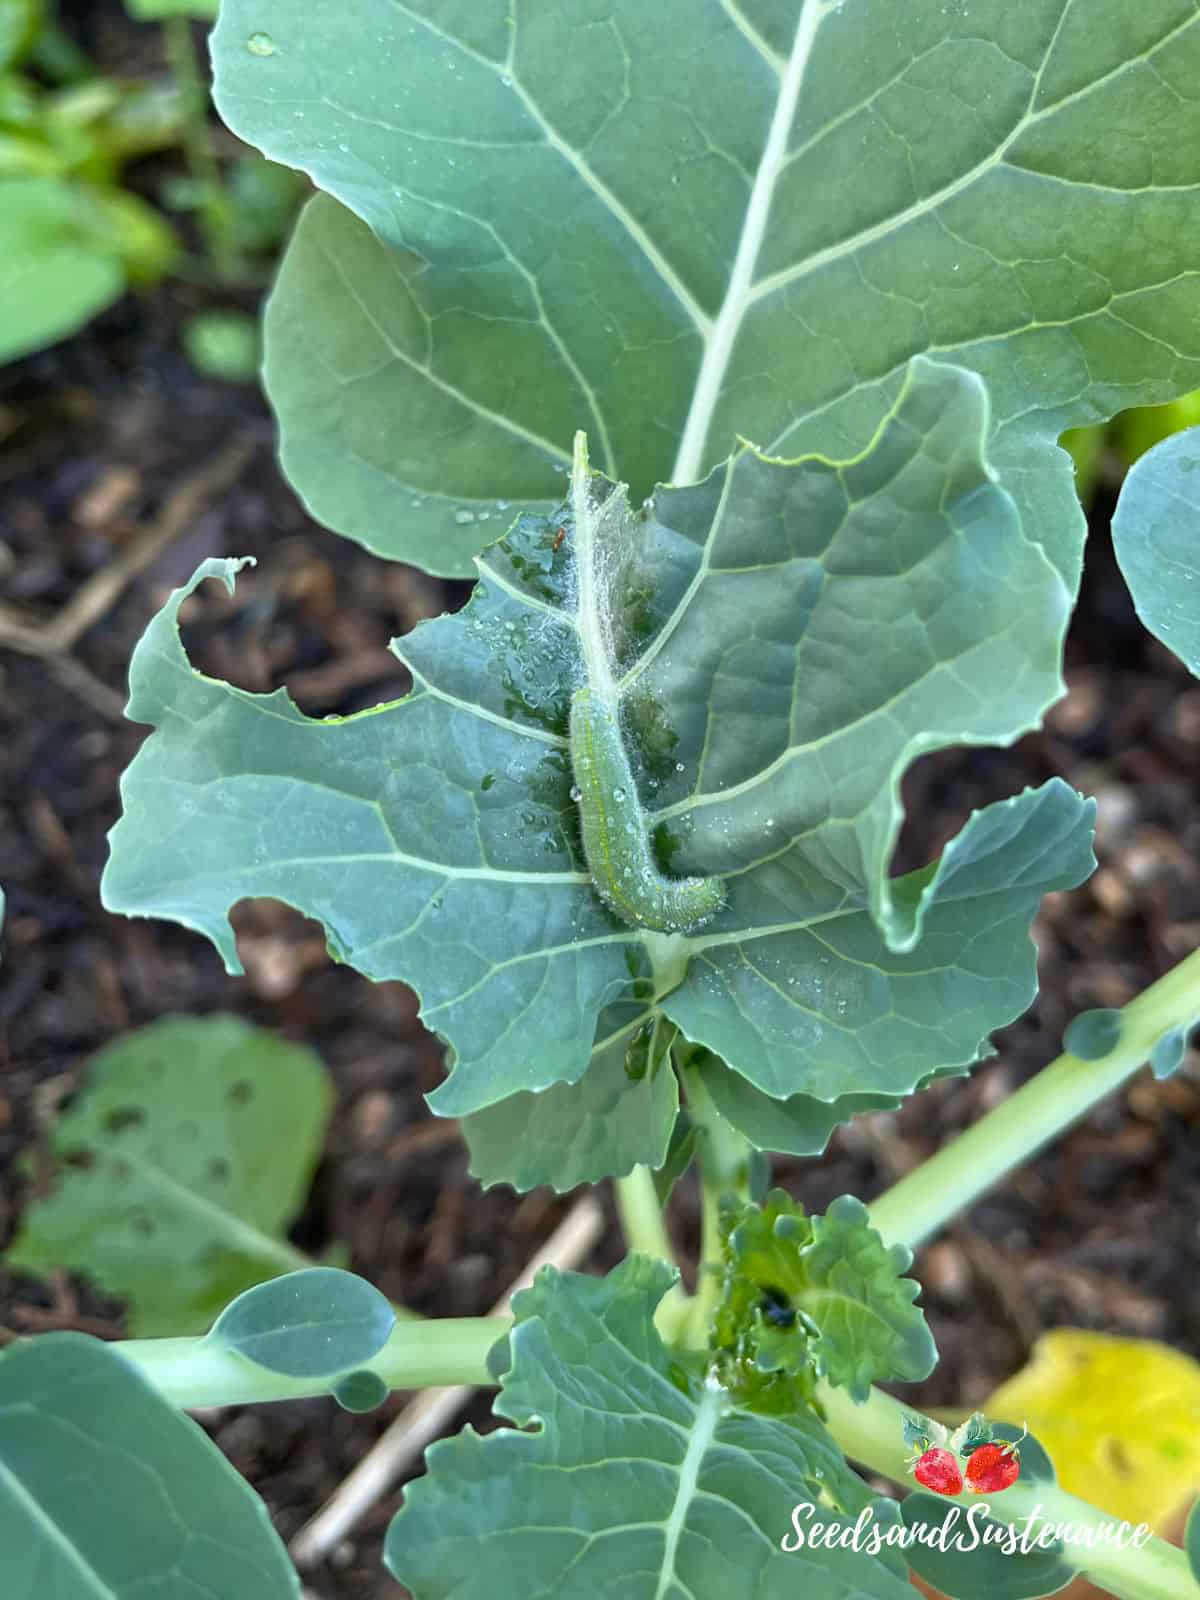 Imported cabbage worm eating a young cauliflower plant - how to get rid of cabbage worms.